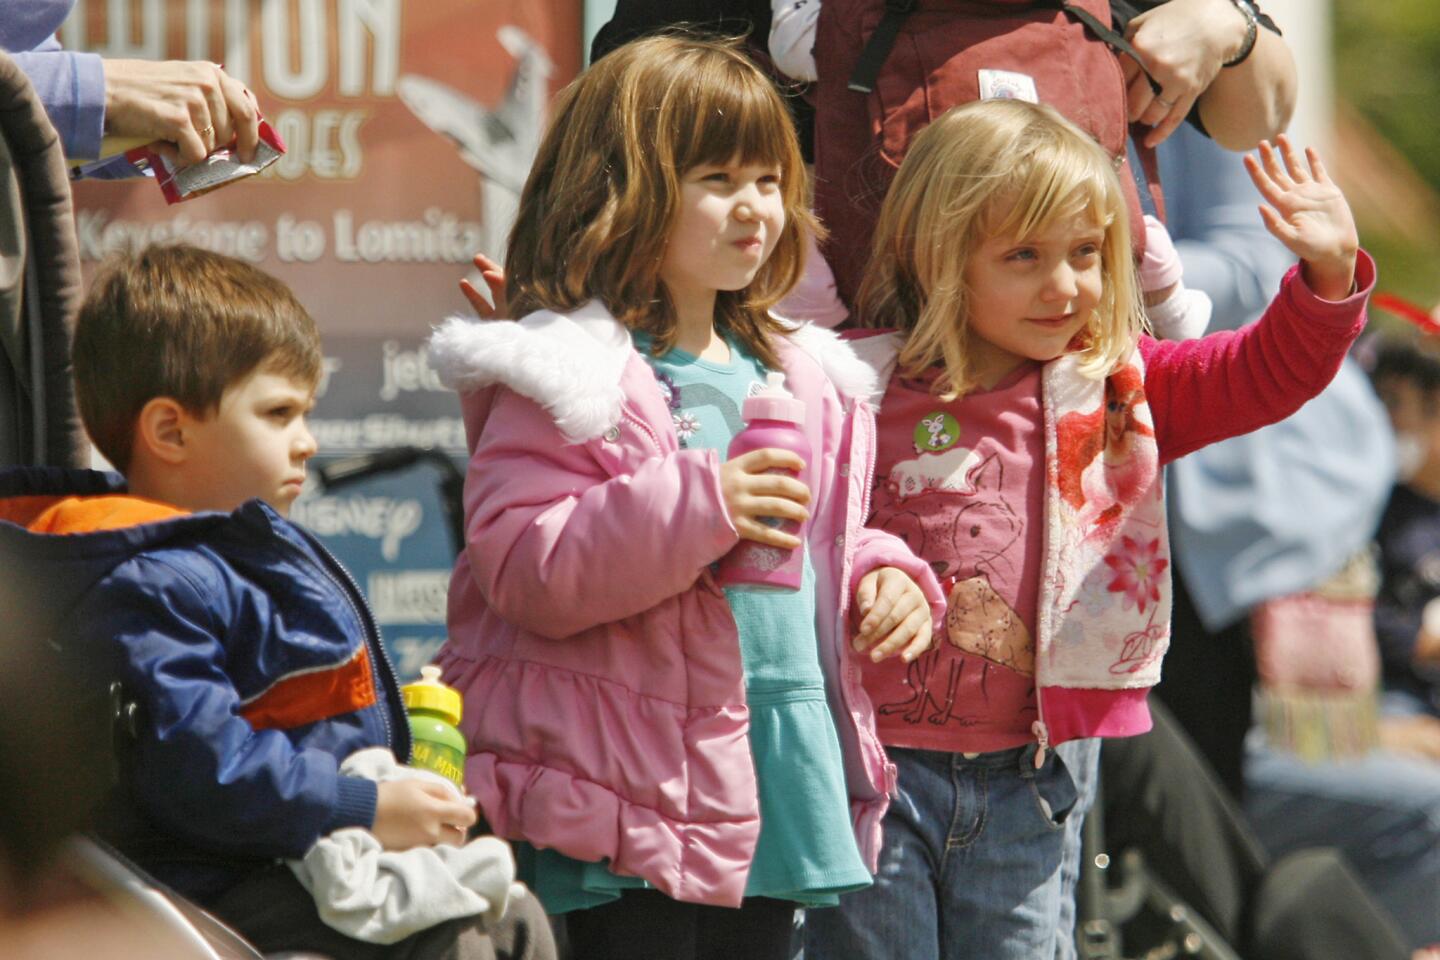 Niko Graft, 2, from left, Niko's sister, Ruby, 4, and Lily Werve, 4, wave to participants in Burbank on Parade, which took place on Olive Ave. between Keystone St. and Lomita St. on Saturday, April 14, 2012.